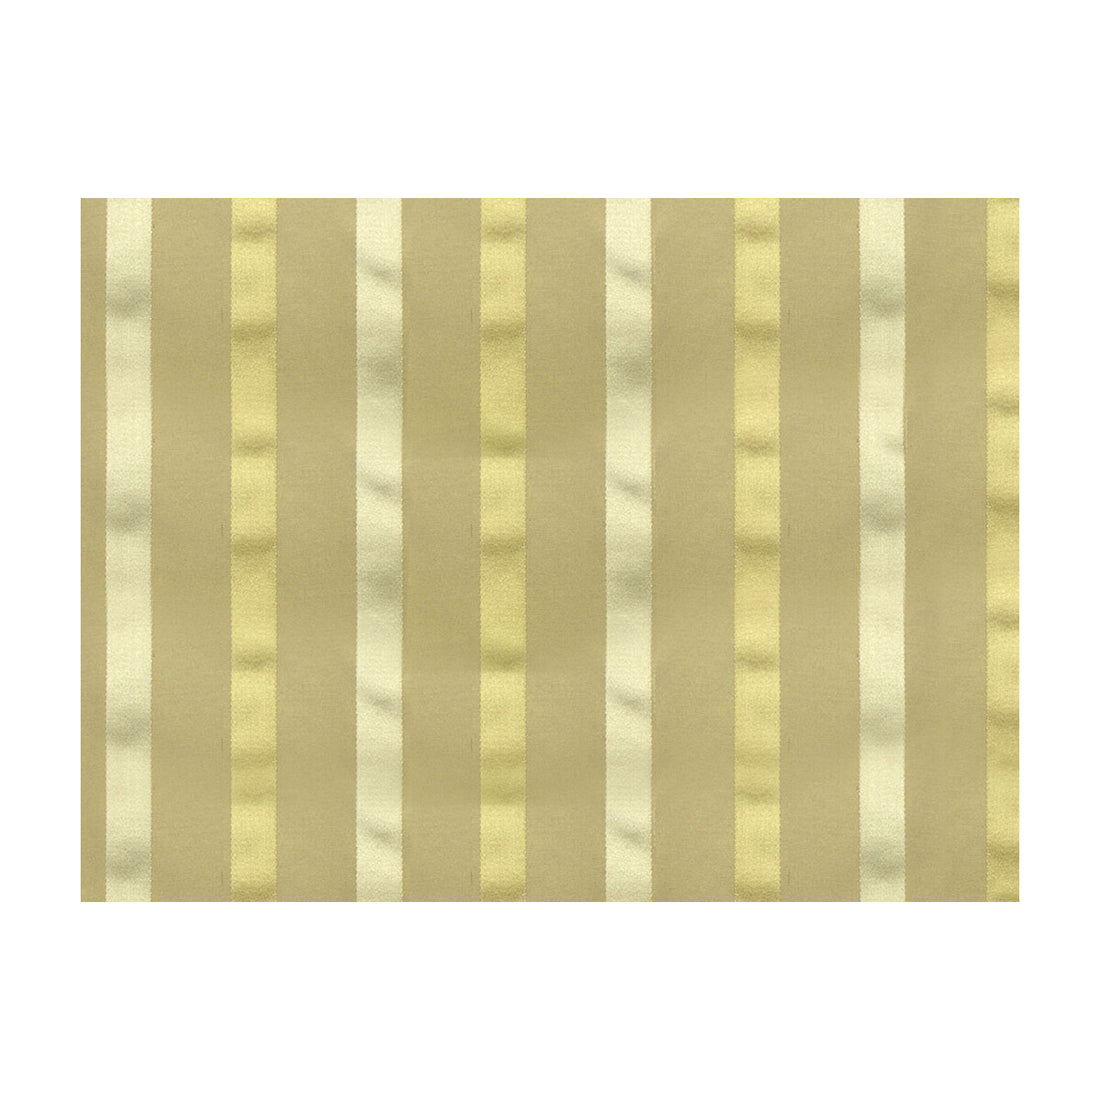 Modern Stripe fabric in noisette color - pattern JAG-50023.16.0 - by Brunschwig &amp; Fils in the Jagtar collection